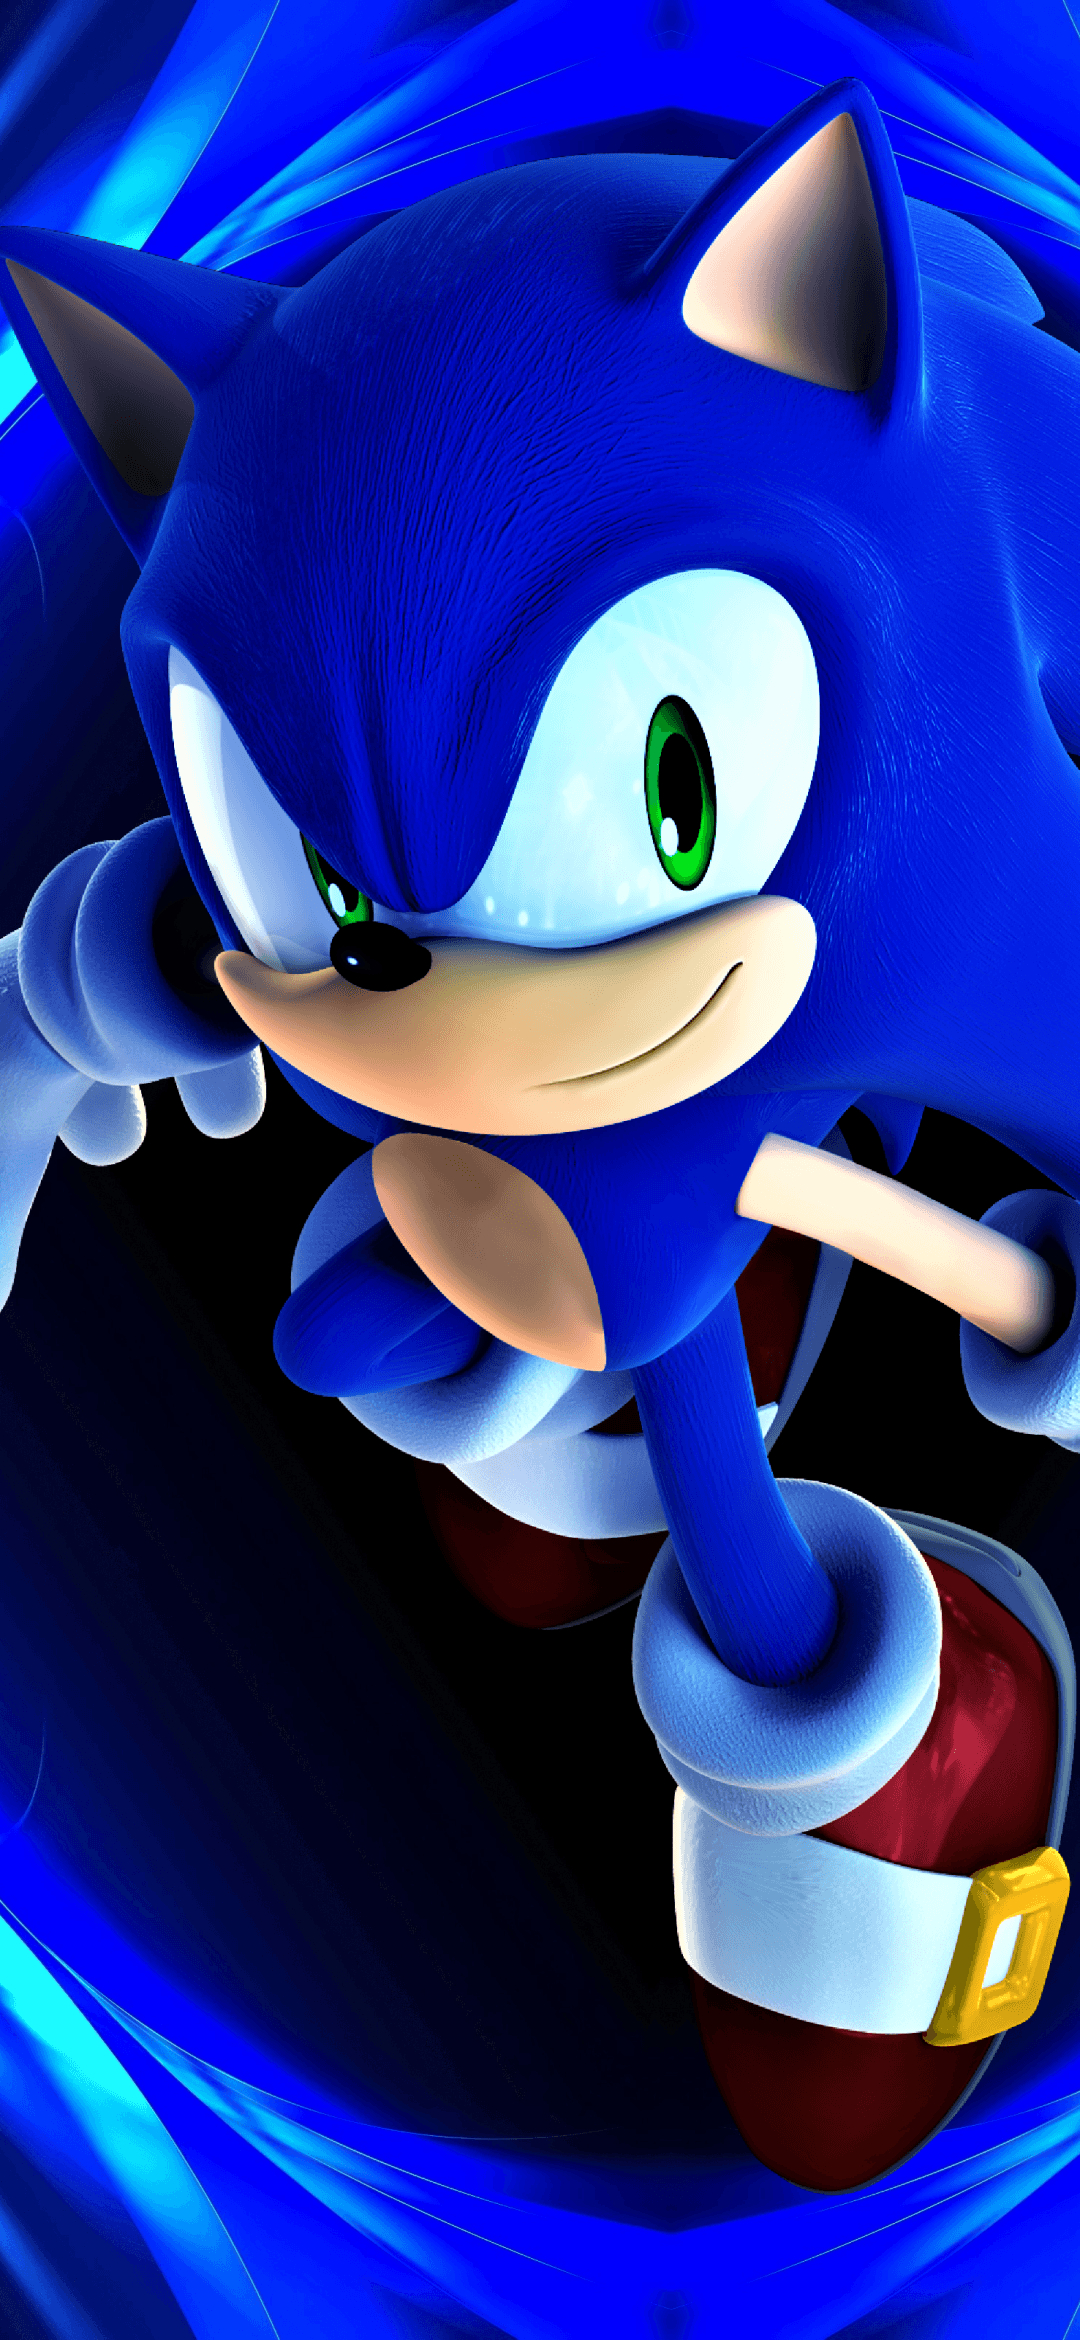 1080x2340 Sonic The Hedgehog Phone Wallpapers